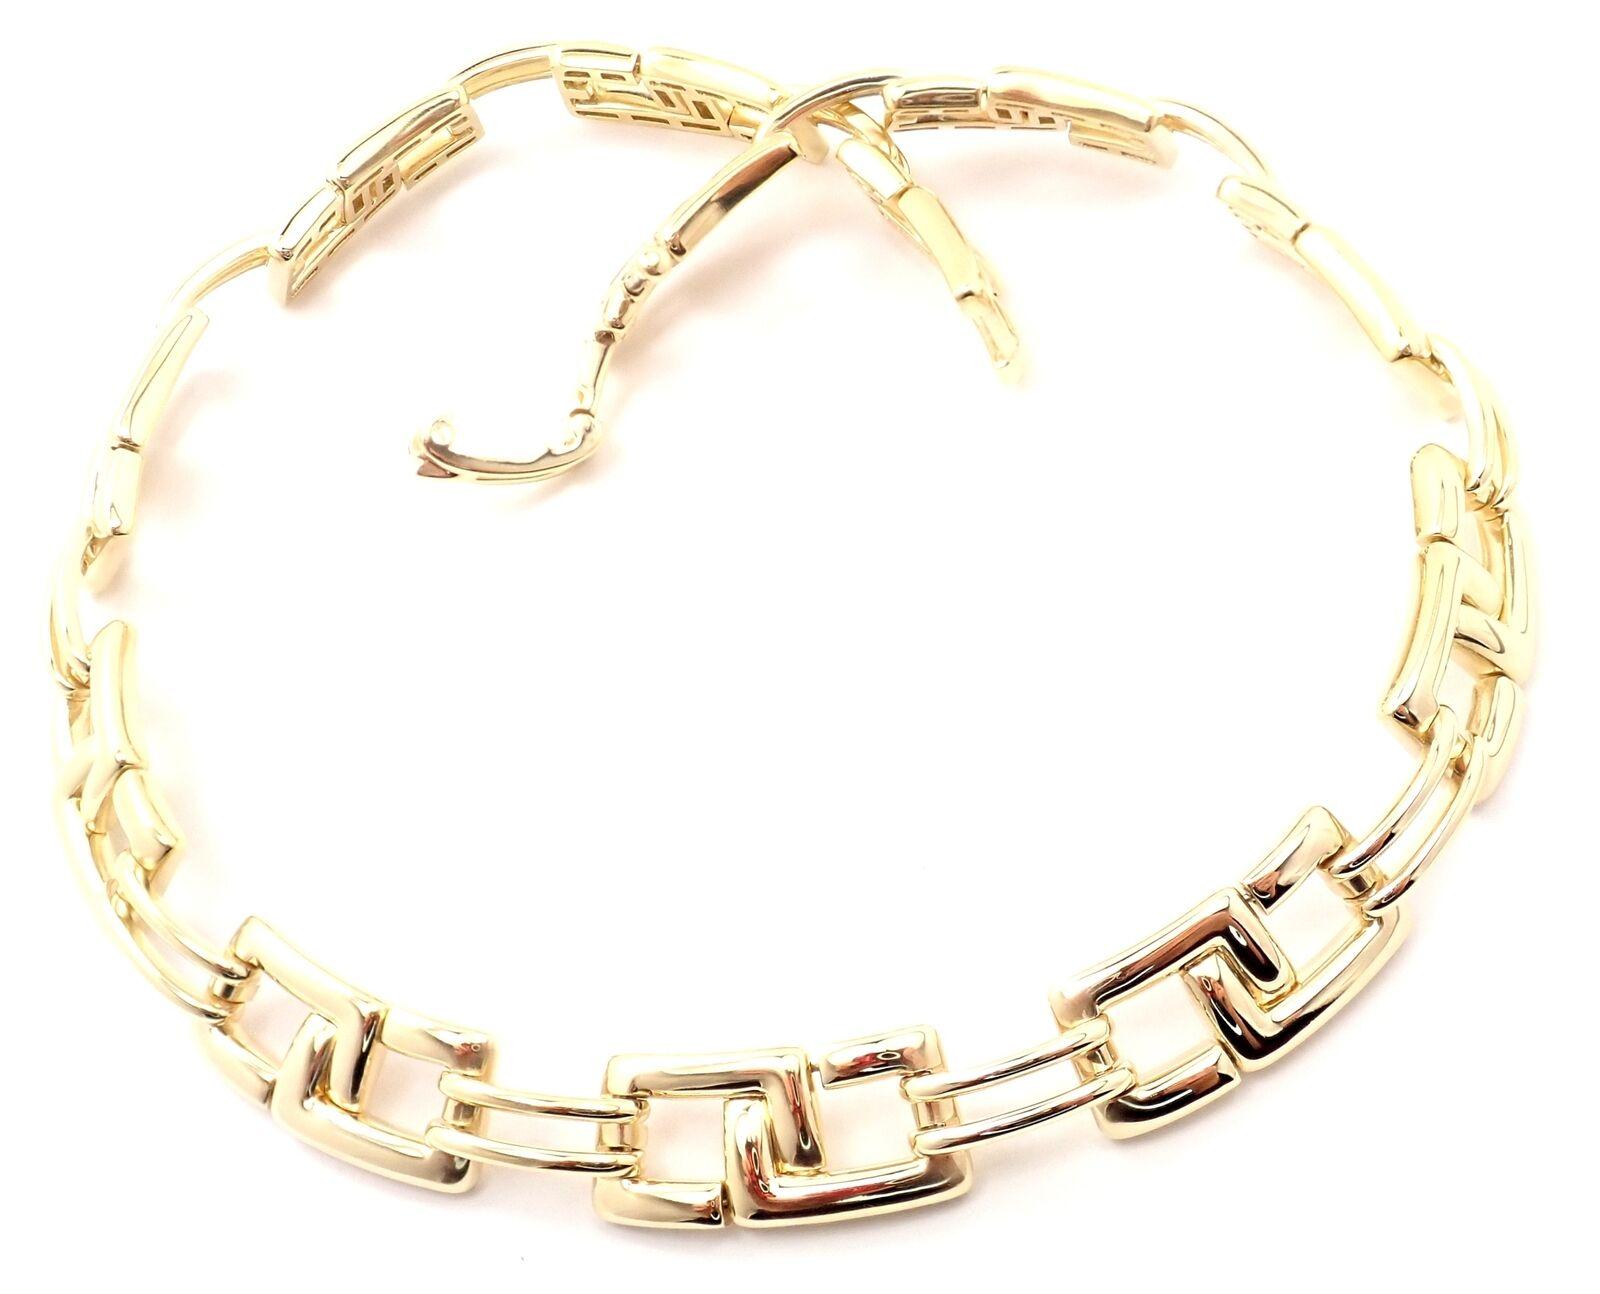 18k Yellow Gold Vintage Wide Link Necklace by Tiffany Co.
Details: 
Length: 17.5
Weight: 118.1 grams
Width: 15mm
Stamped Hallmarks: T&Co 2001 750 Italy
*Free Shipping within the United States*
YOUR PRICE: $22,000
T3071mmlre